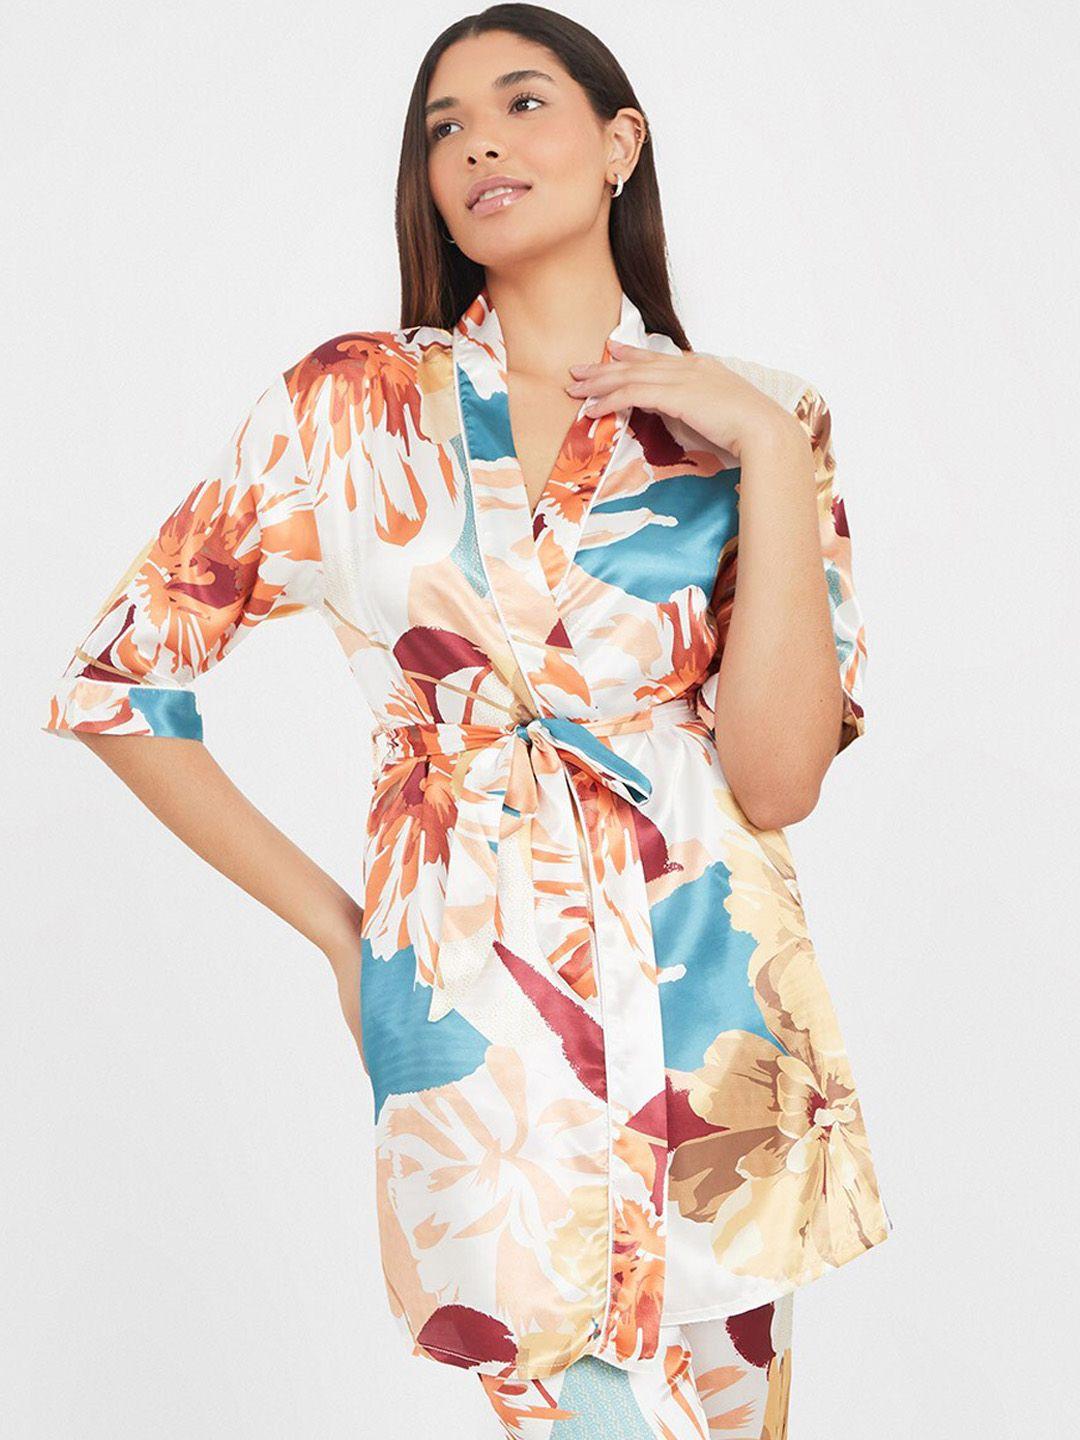 styli floral printed night suit